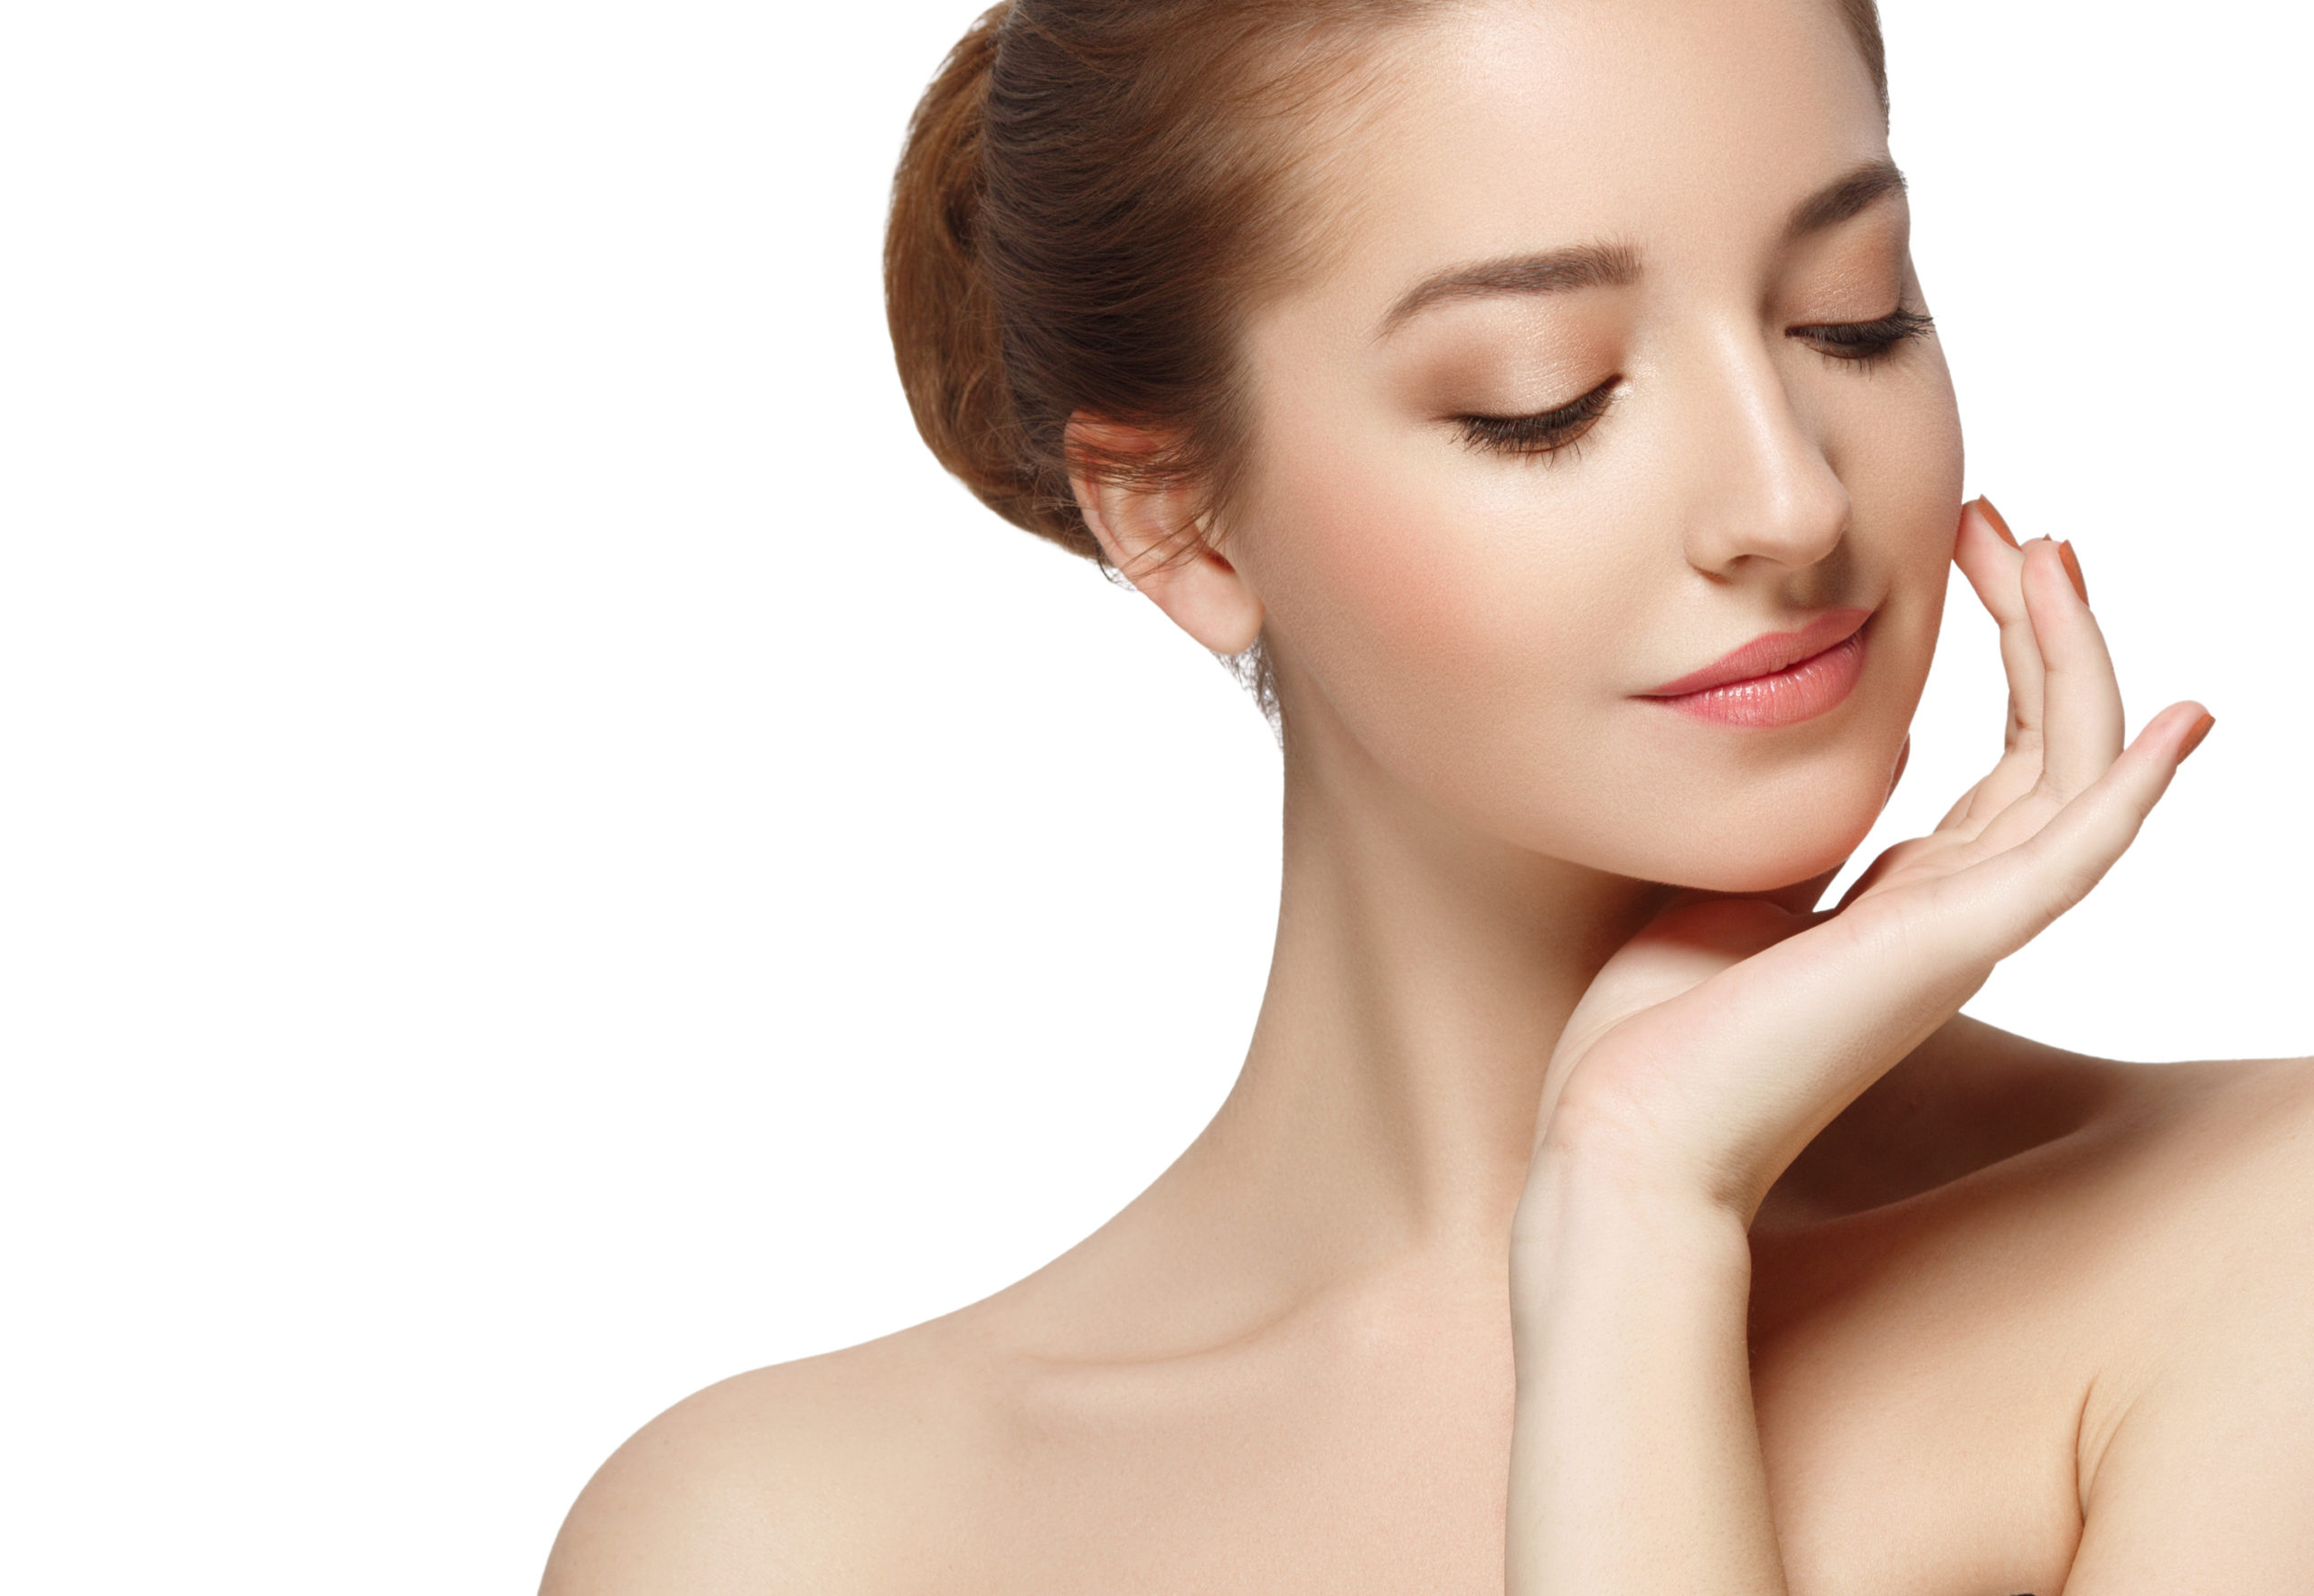 Dermal Fillers and Injectables in Baltimore, MD